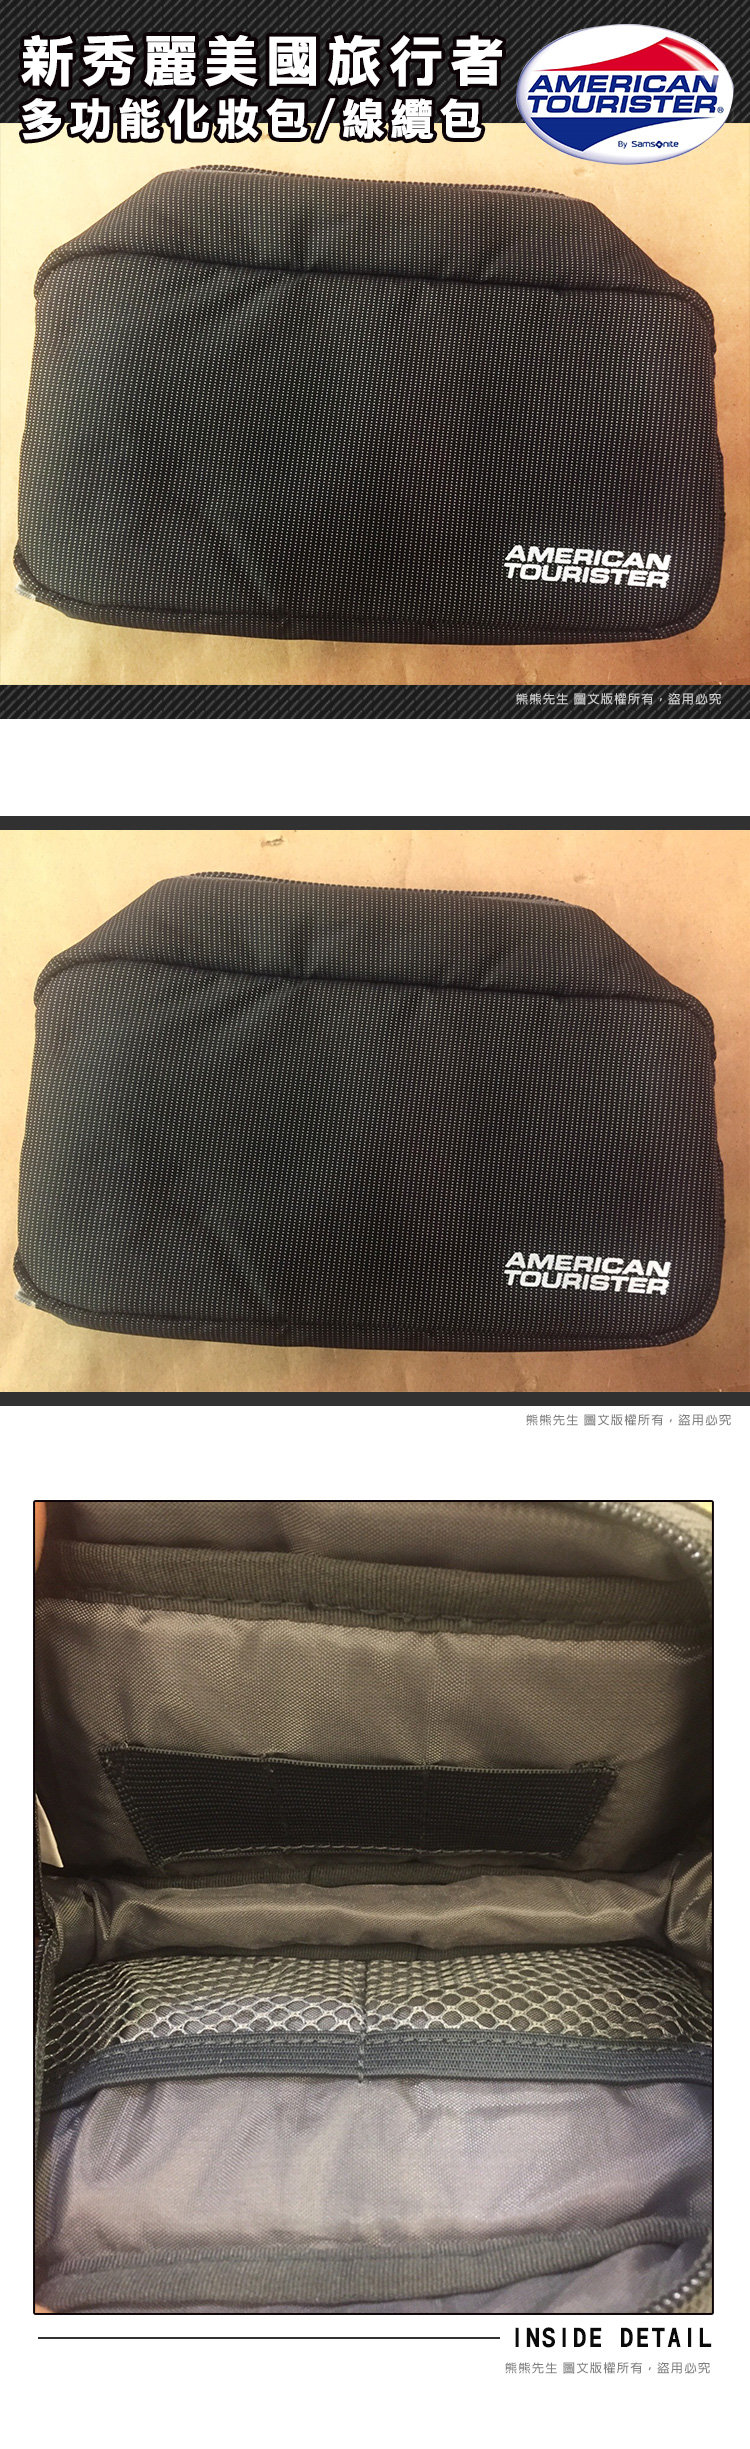 https://shop.r10s.com/e24b9150-ec8b-11e4-979f-005056b74d17/upload/other/AT-CABLEPOUCH.jpg